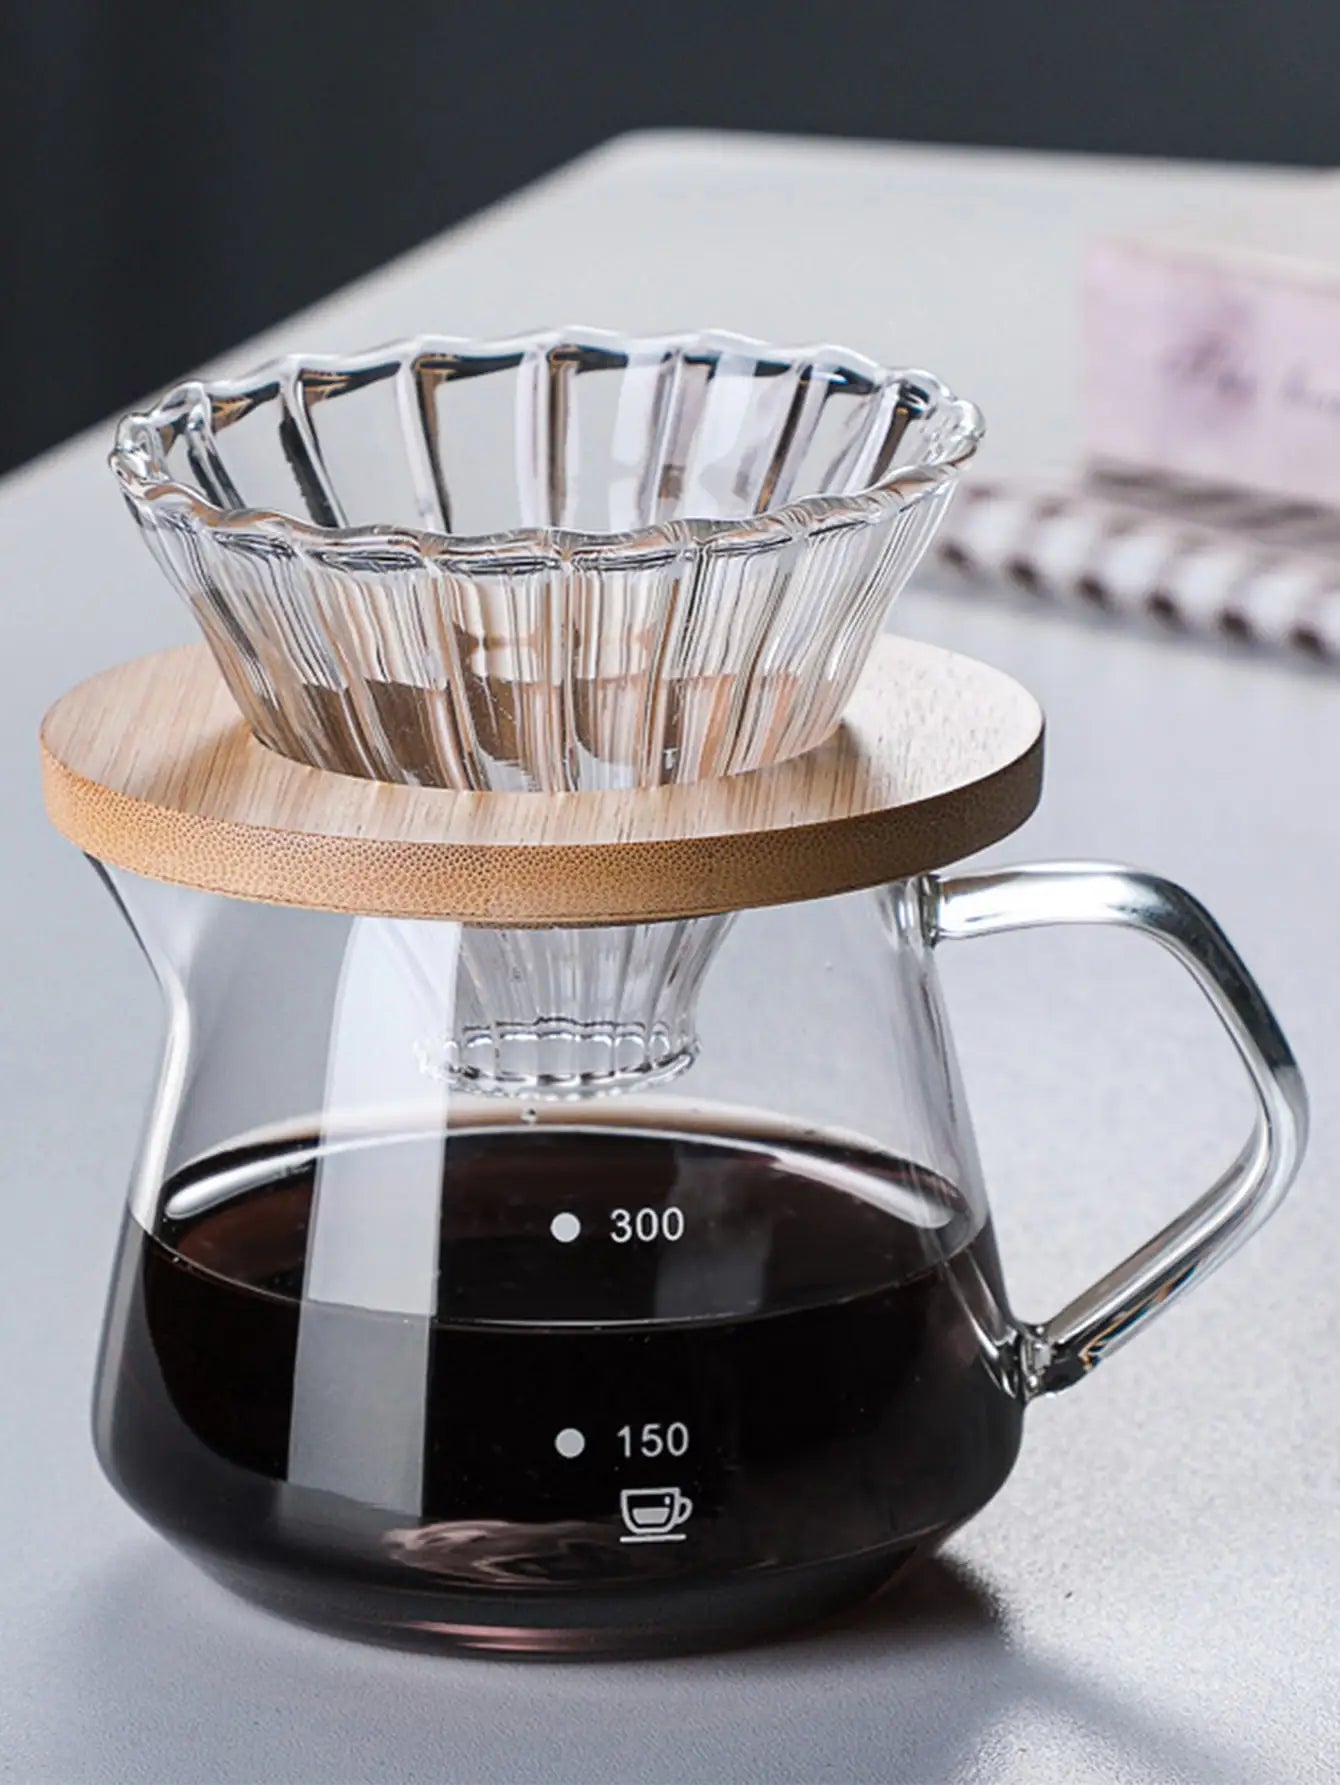 Leeseph Pour Over Coffee Maker, Glass Carafe Coffee with Glass Coffee Filter, Drip Coffee Maker Set for Home or Office, 300ml